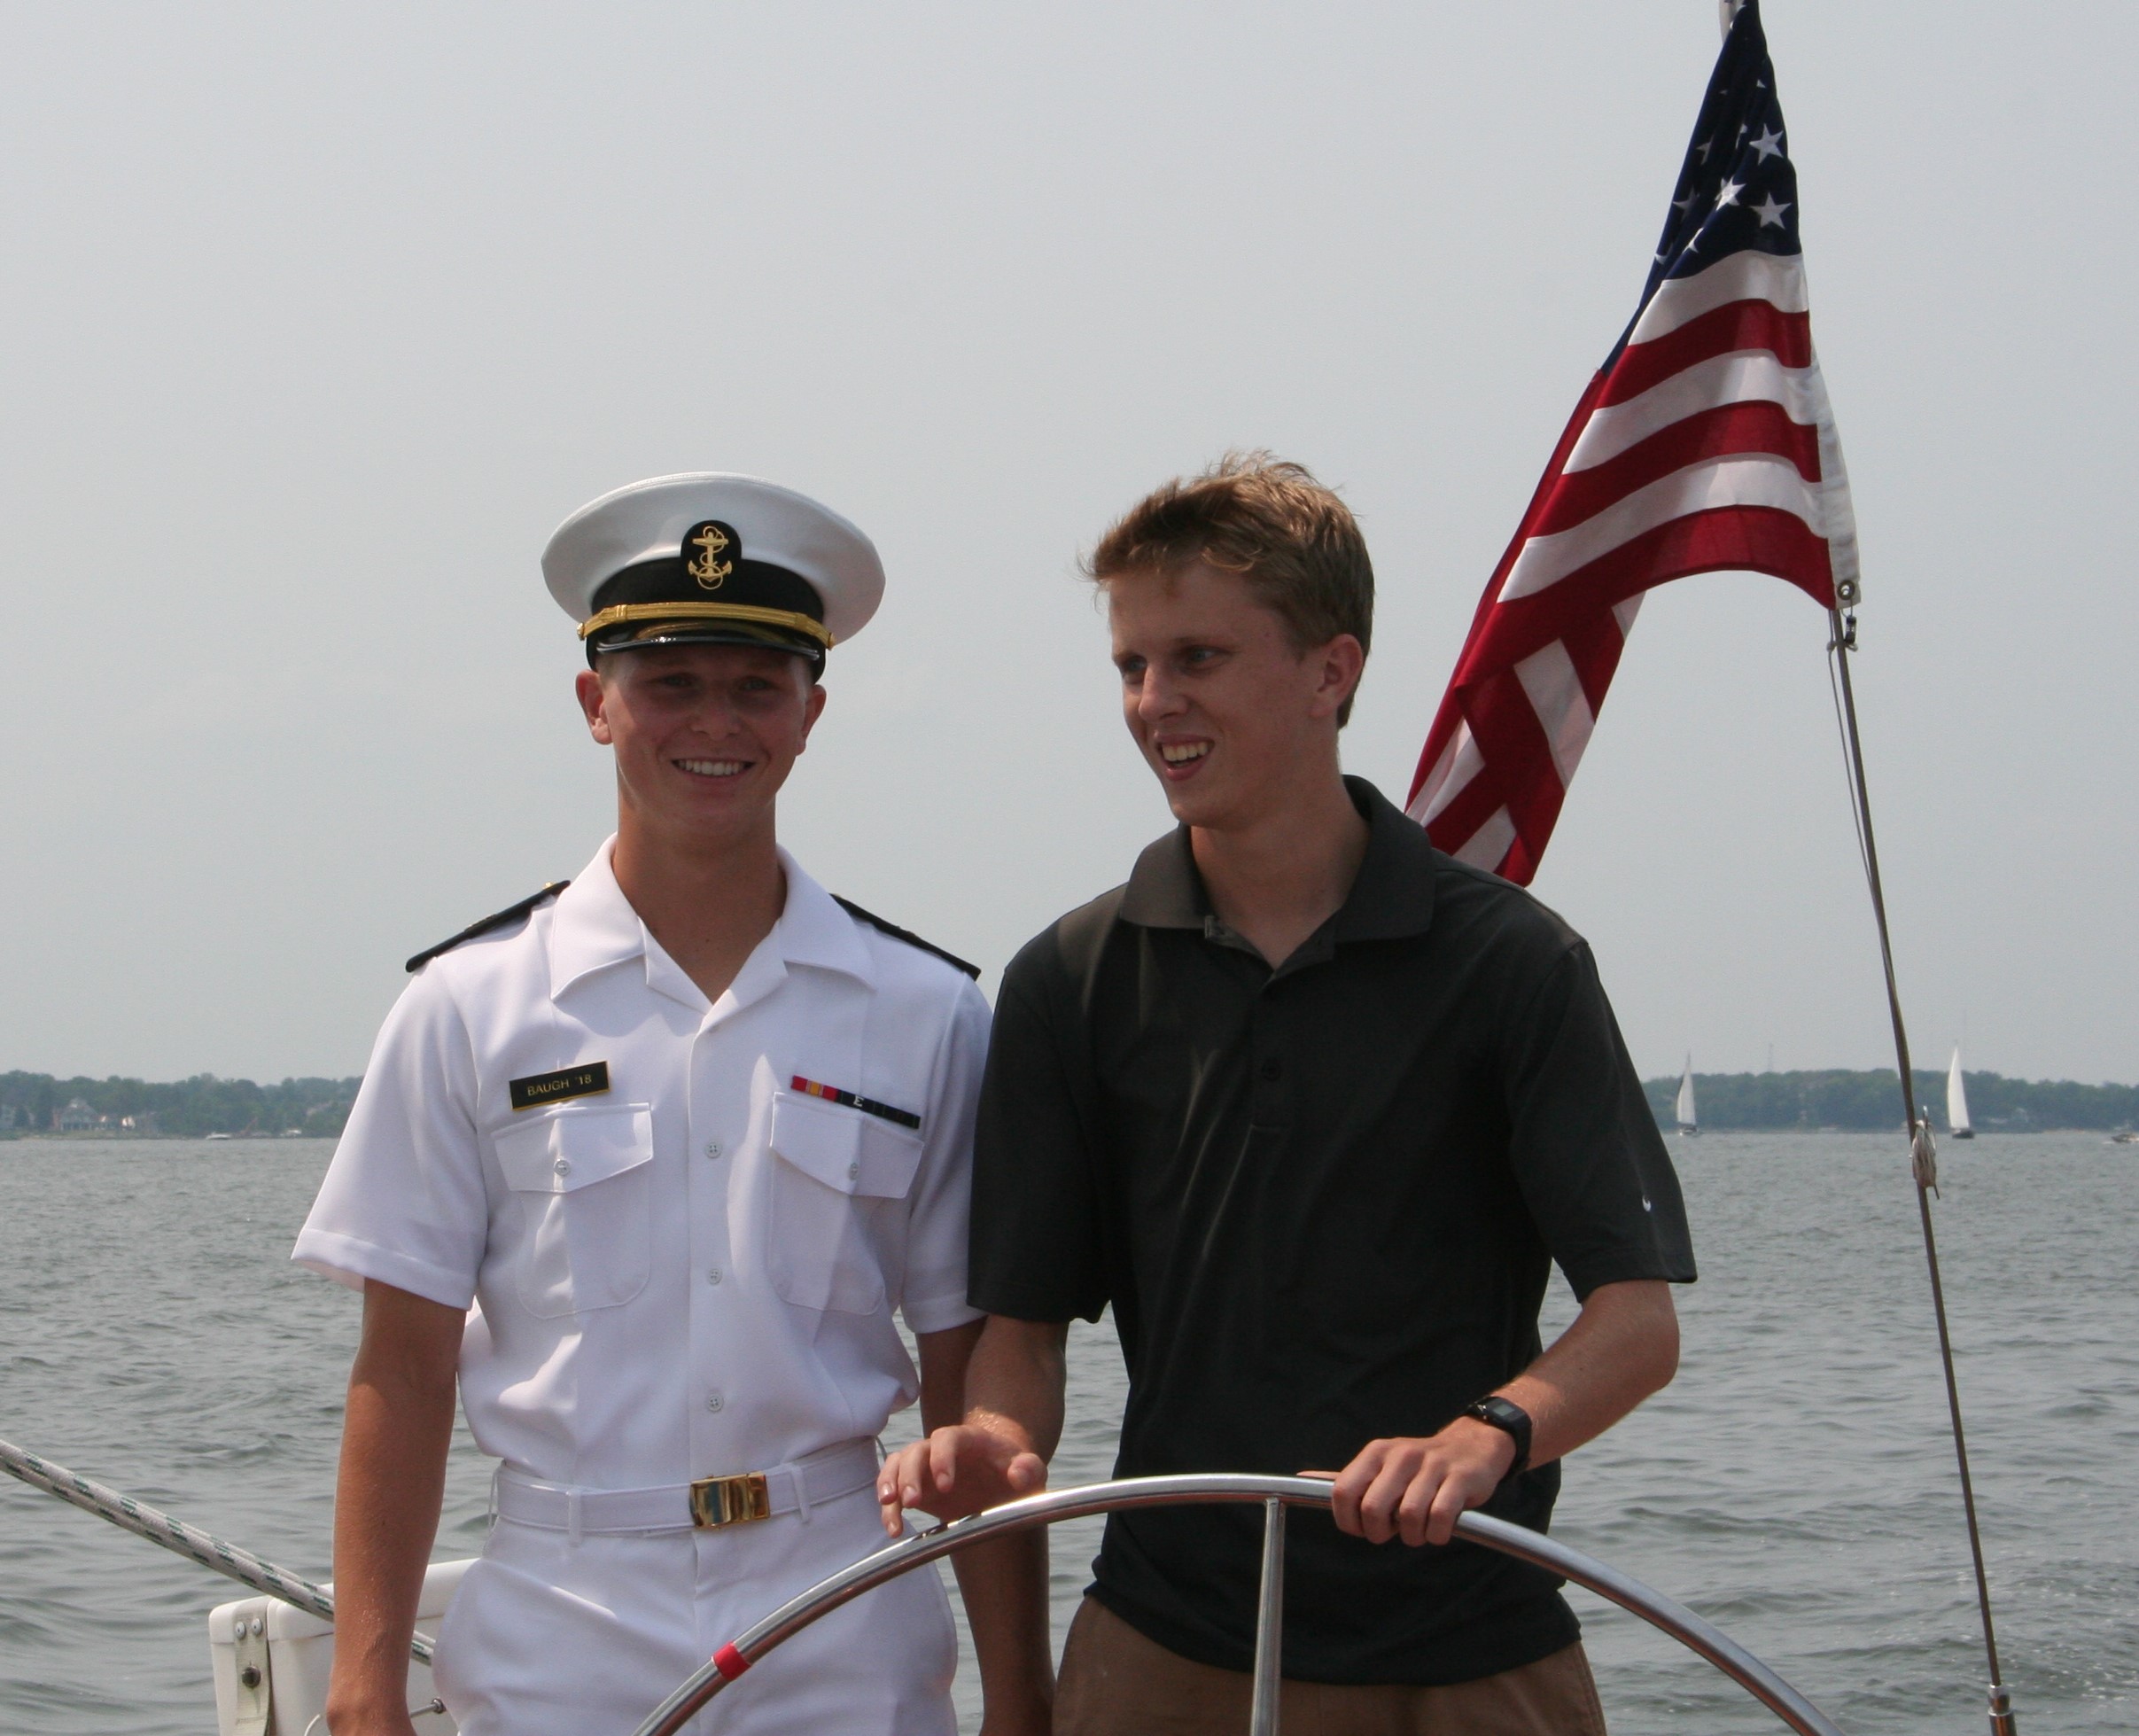 One man in USNA uniform and one guest steering the schooner together